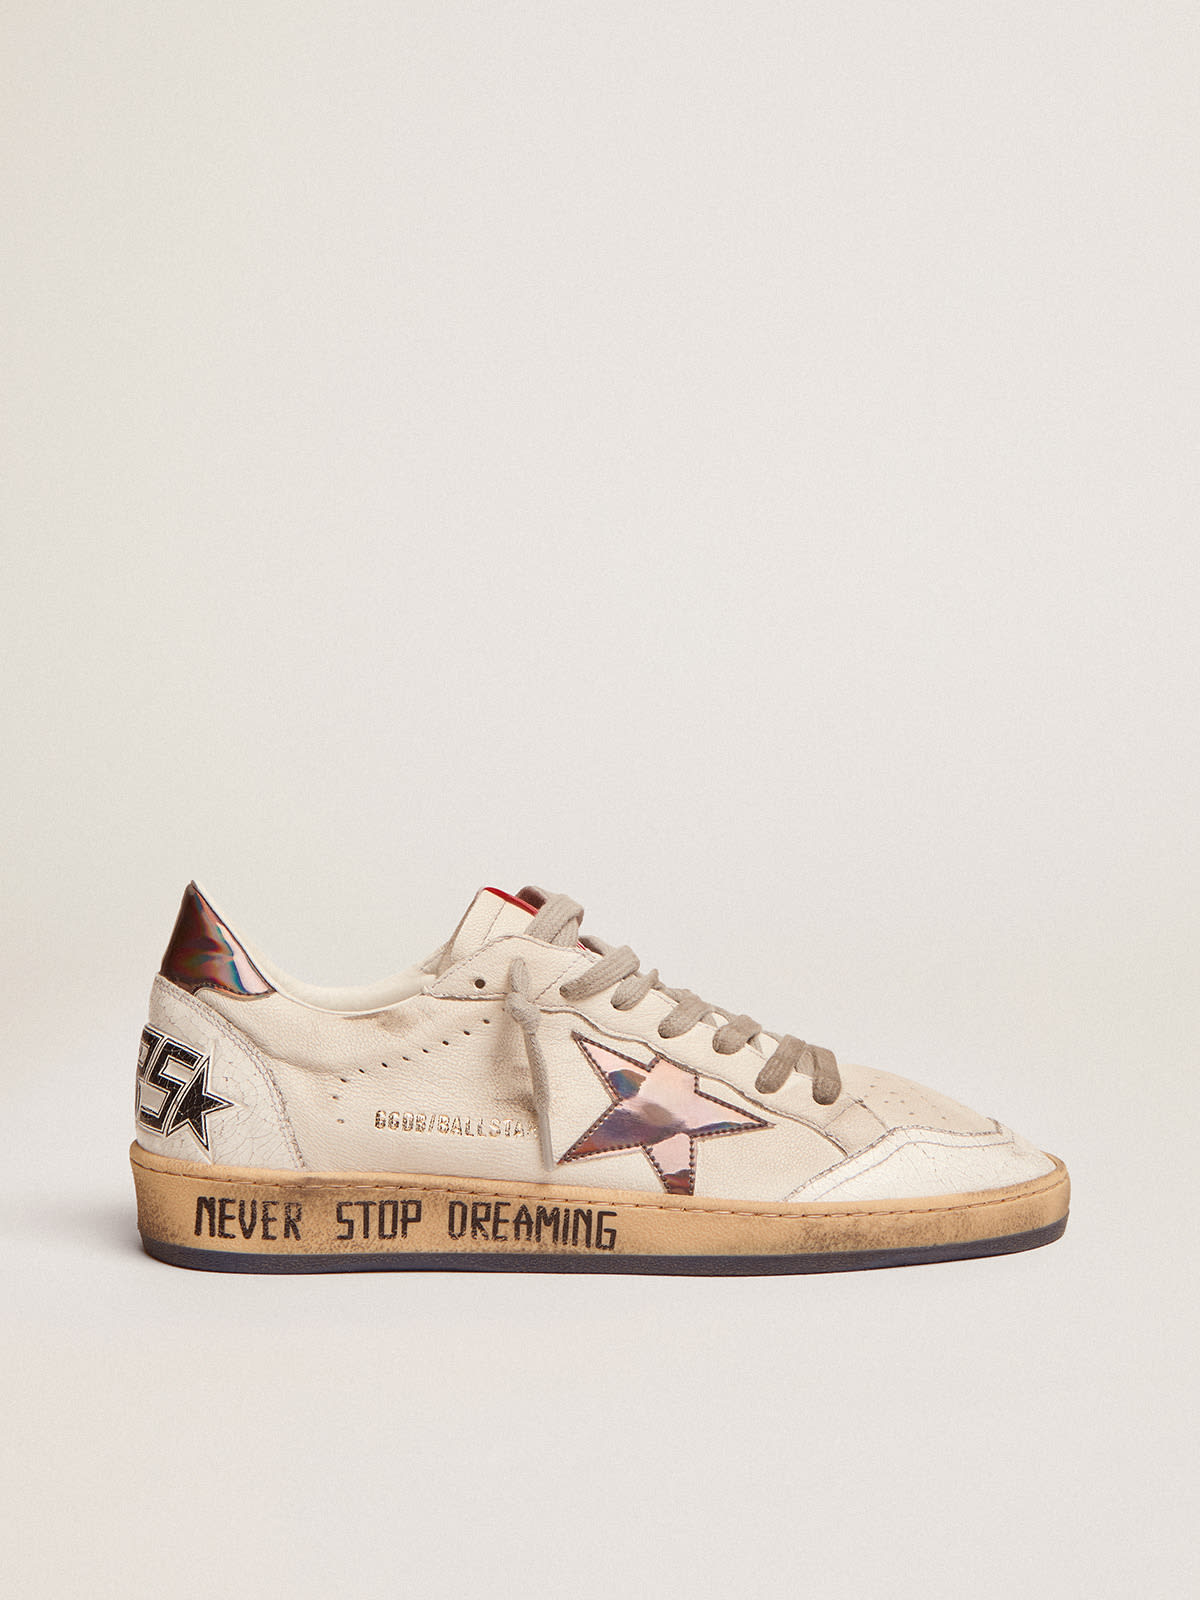 Golden Goose - Ball Star sneakers in nappa leather with holographic inserts and lettering on the sole in 